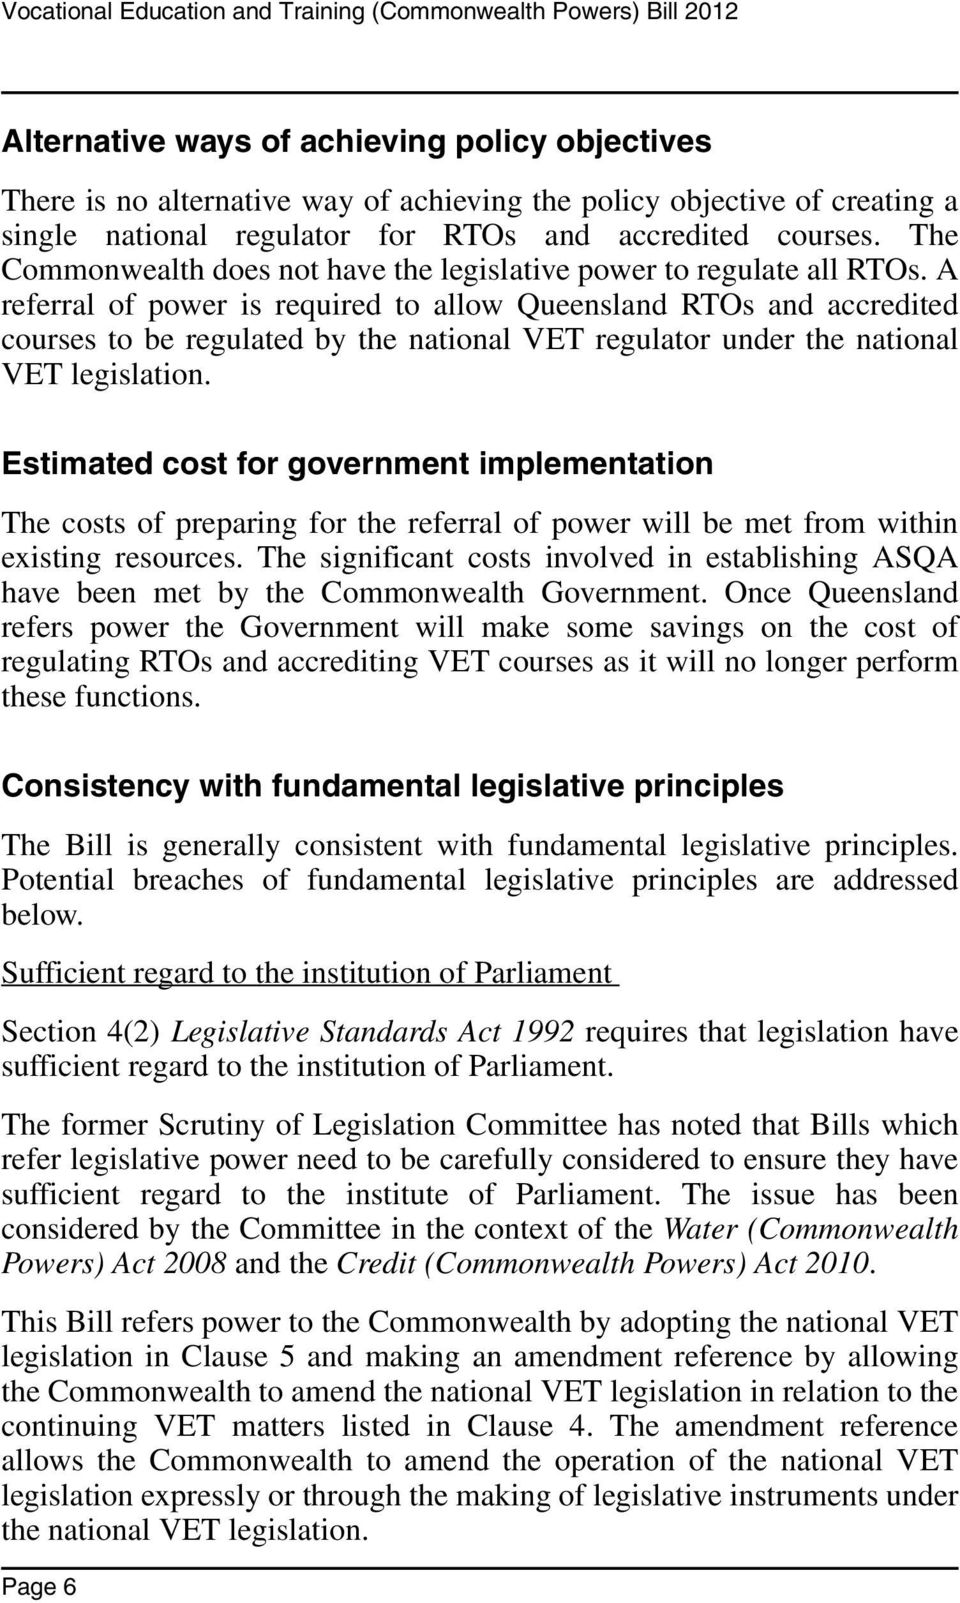 A referral of power is required to allow Queensland RTOs and accredited courses to be regulated by the national VET regulator under the national VET legislation.